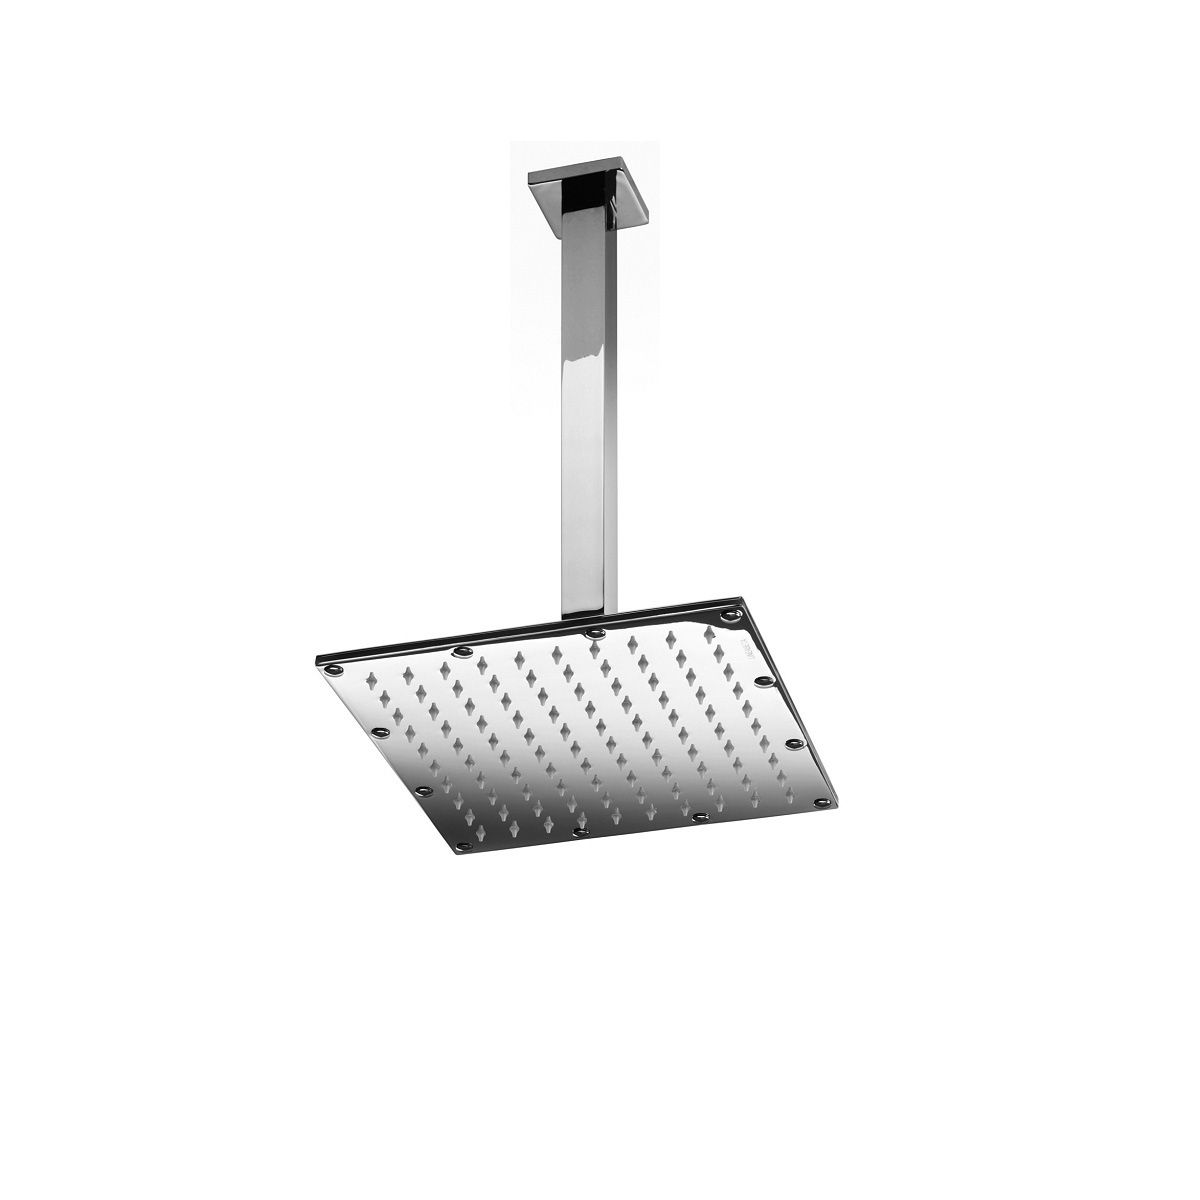 Rain Style Shower Heads are Elegant and Beautiful